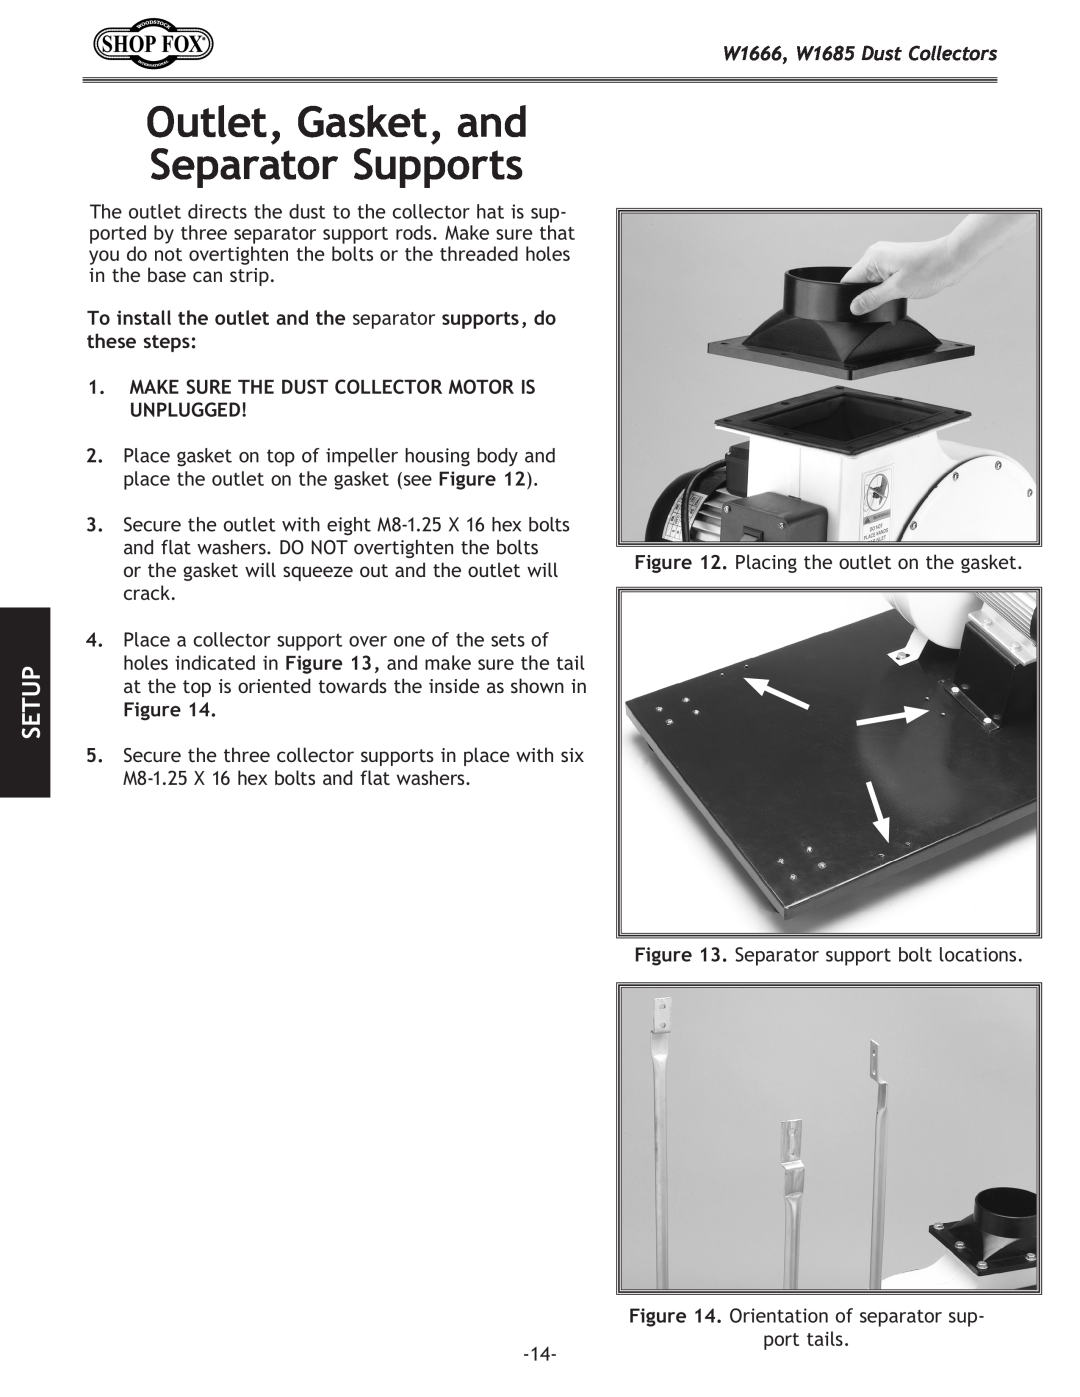 Woodstock DUST COLLECTORS instruction manual Outlet, Gasket, and Separator Supports, Setup, W1666, W1685 Dust Collectors 